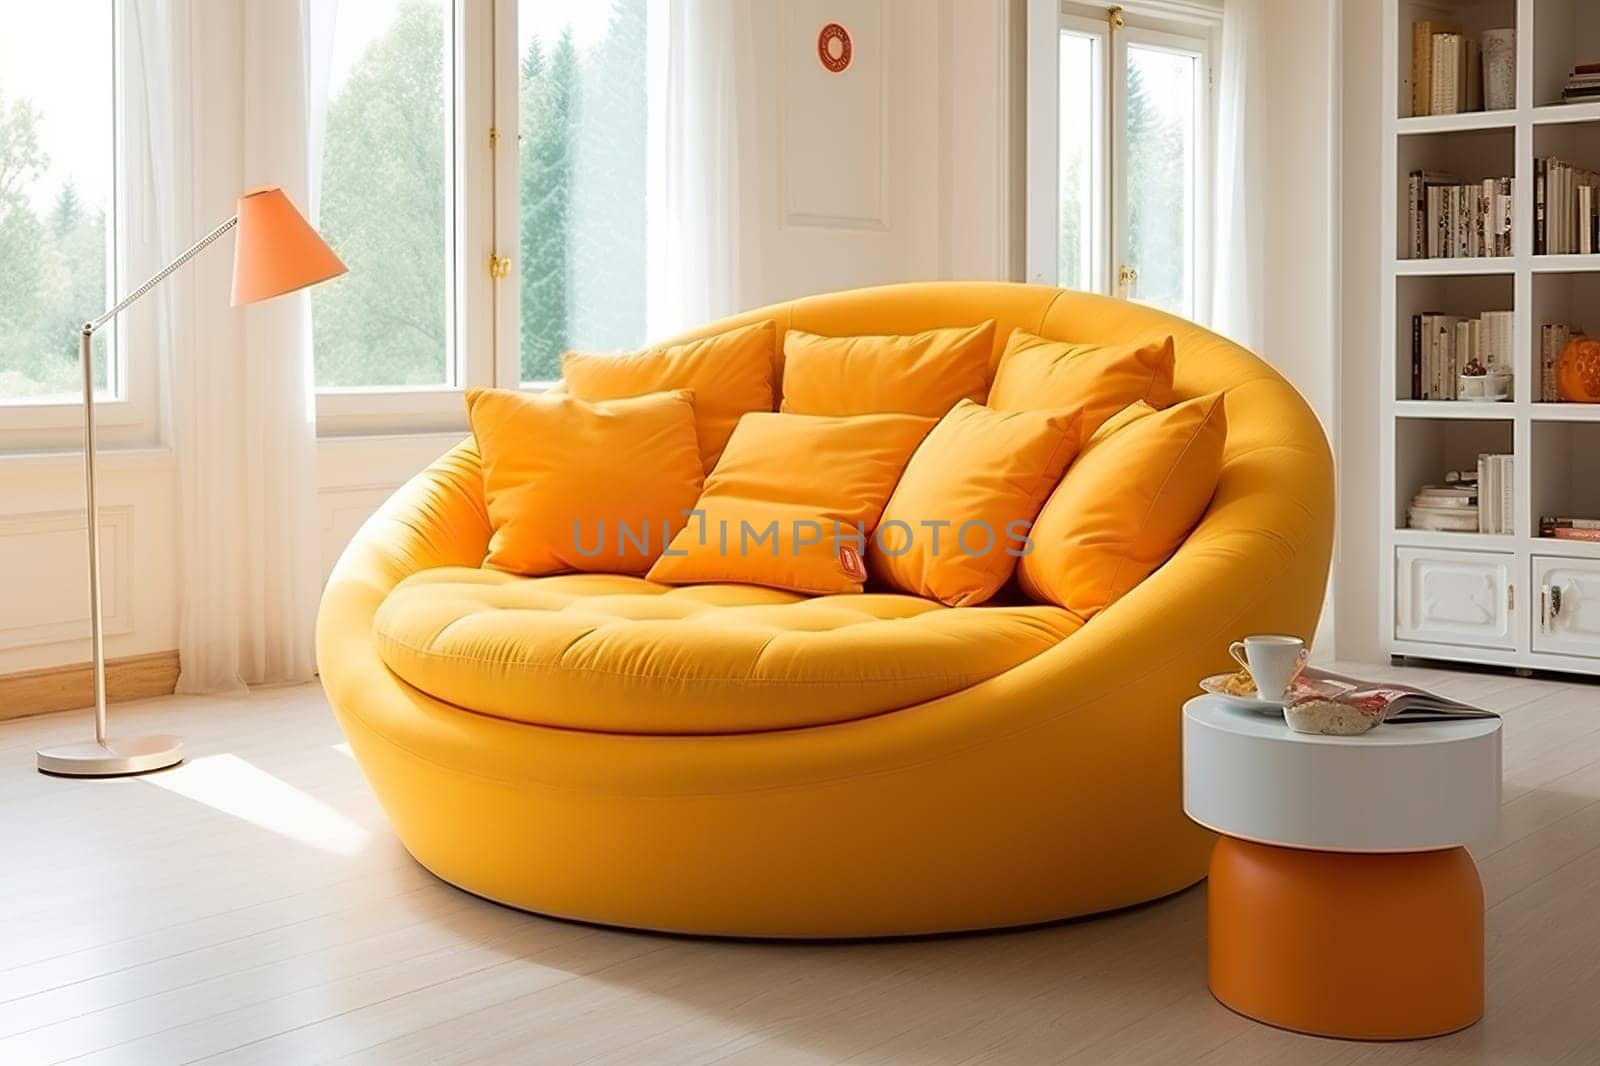 Room interior with a yellow sofa.